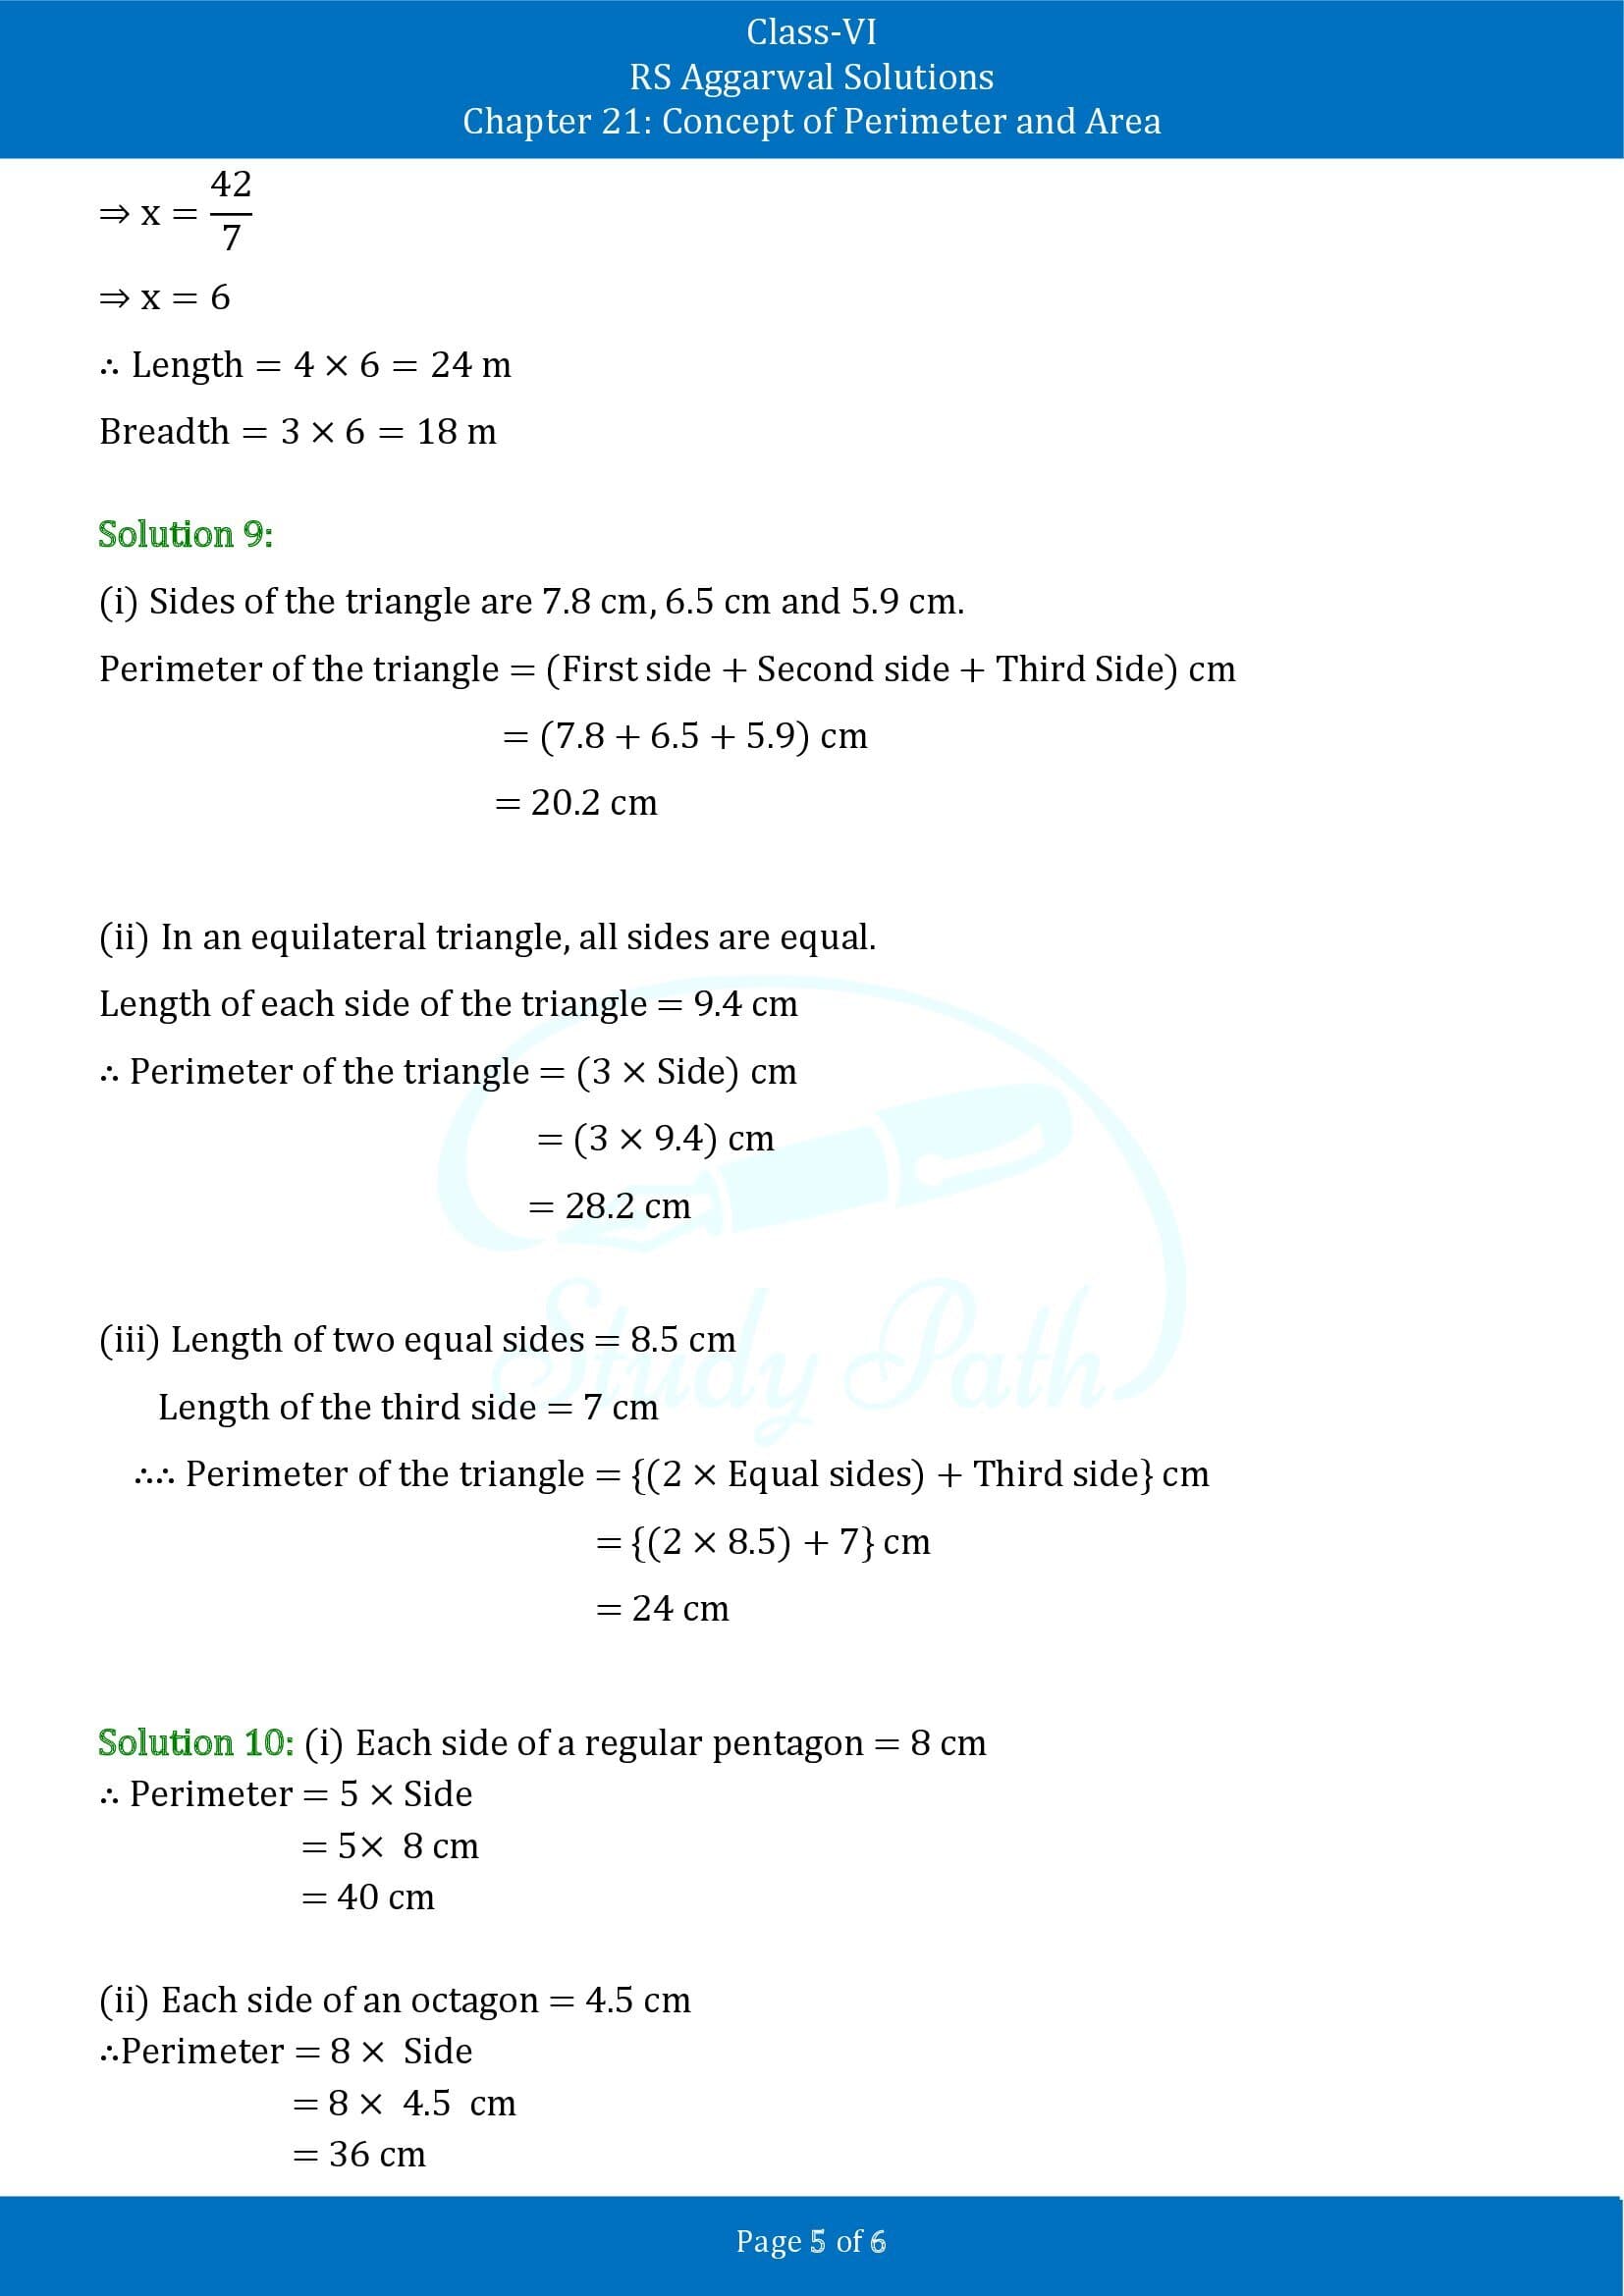 RS Aggarwal Solutions Class 6 Chapter 21 Concept of Perimeter and Area Exercise 21A 00005